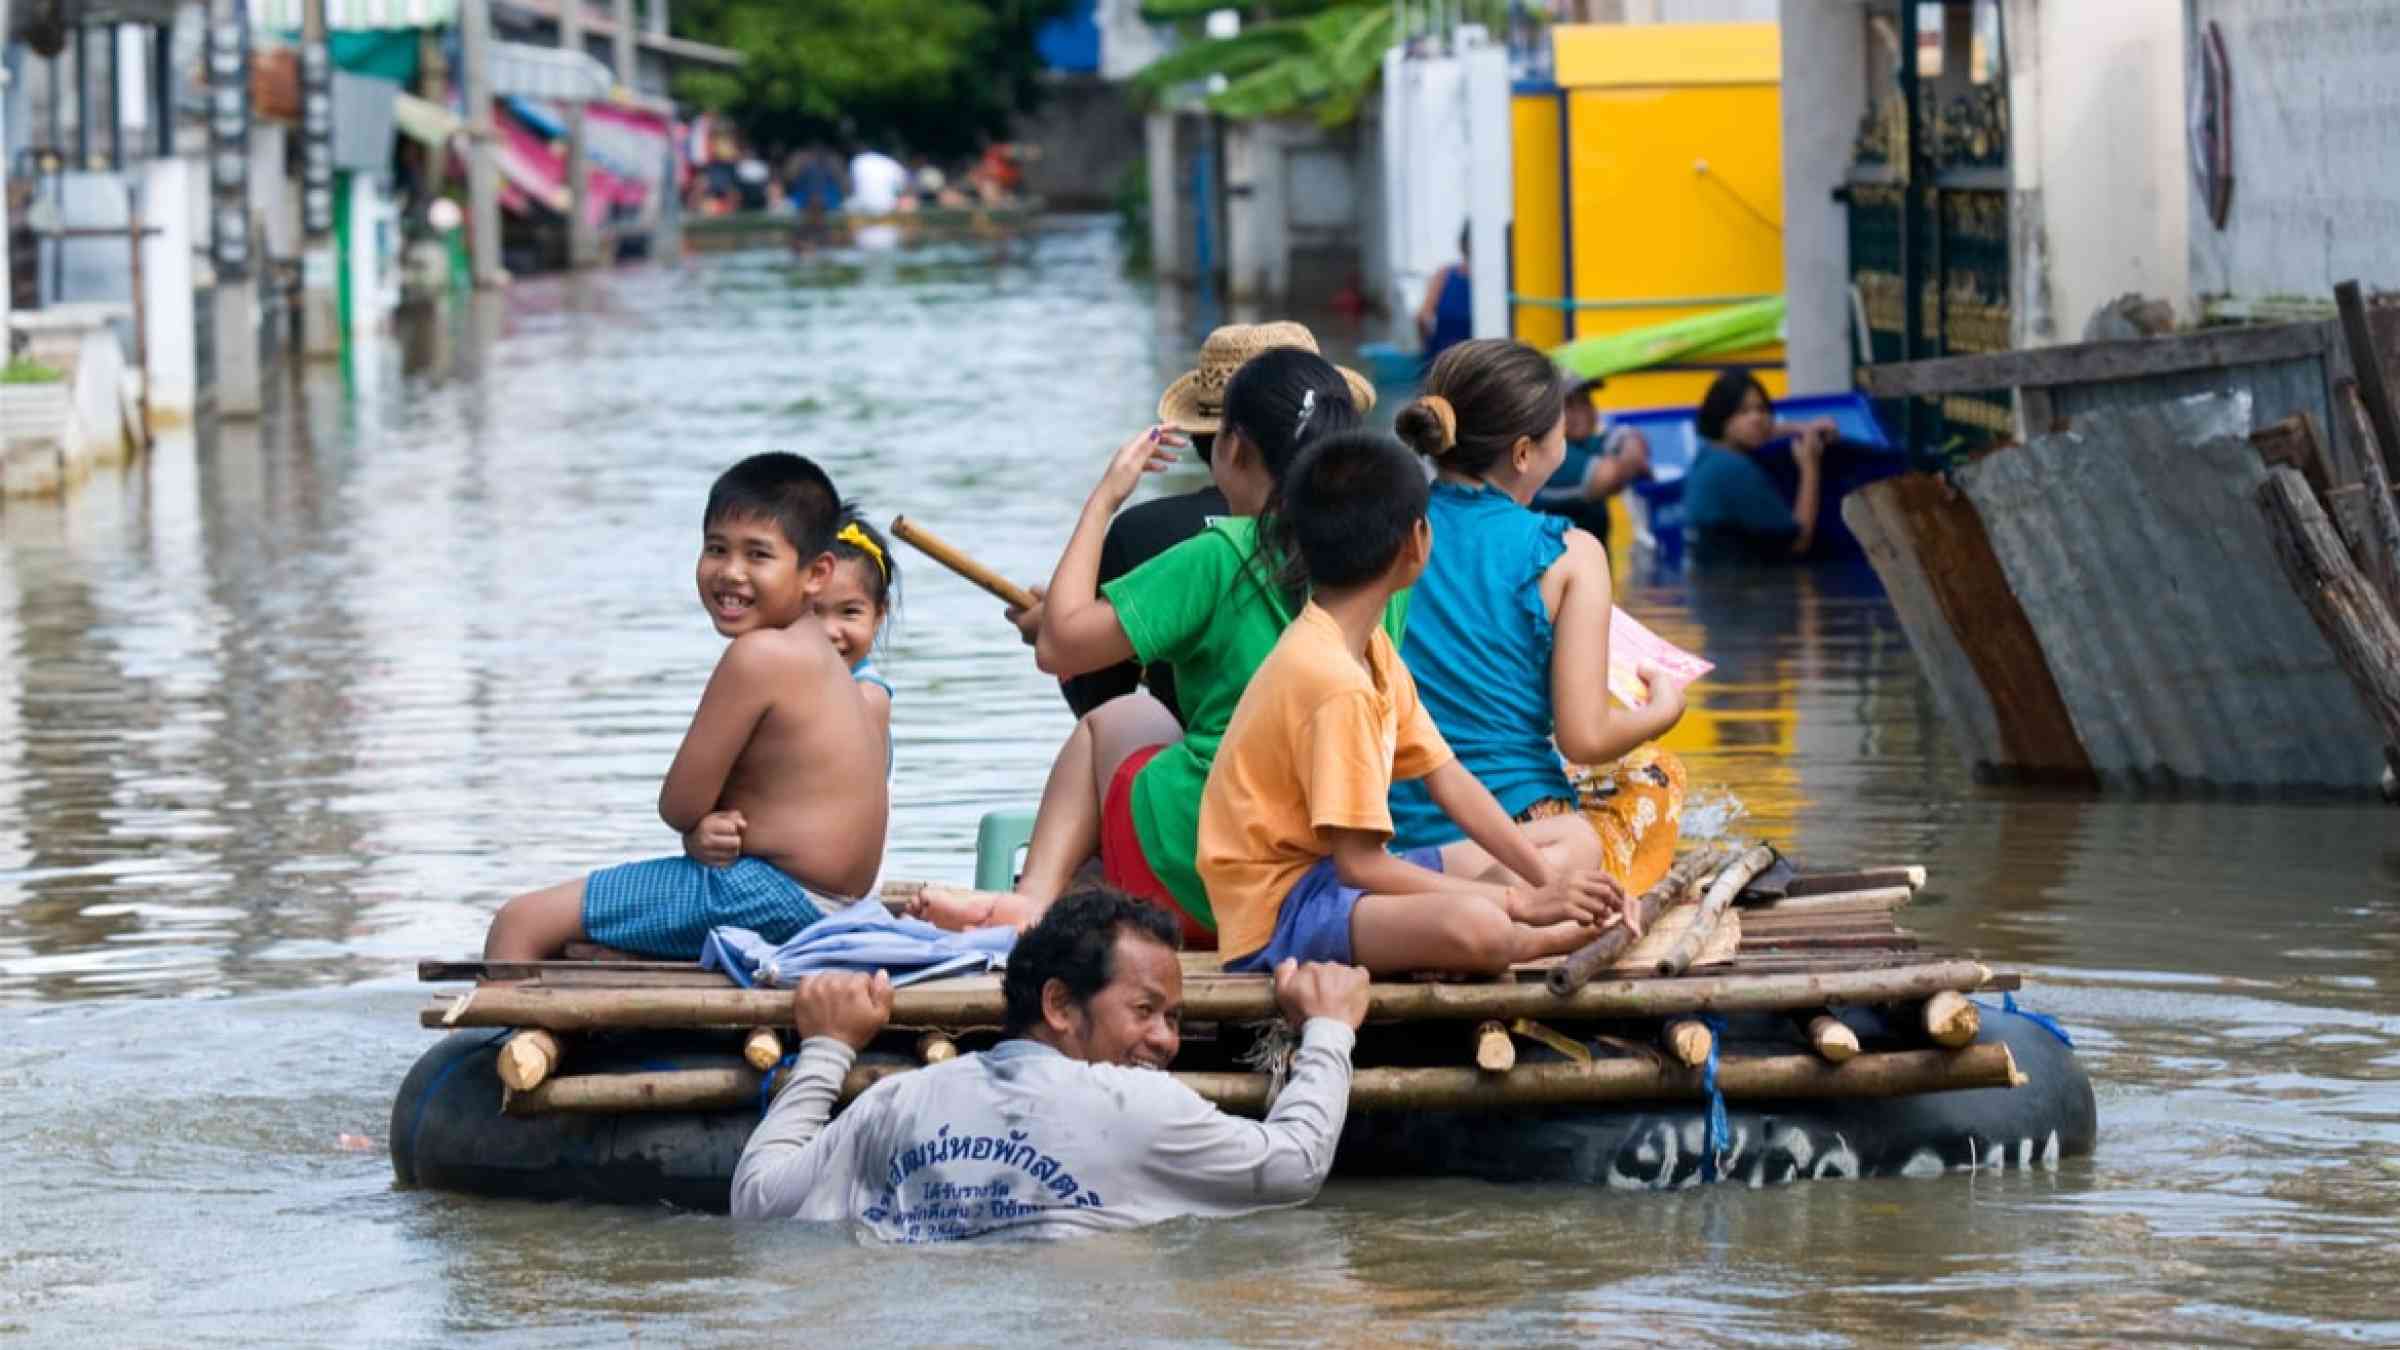 Villagers going home on an improvised raft during the monsoon flooding in Thailand, 2010